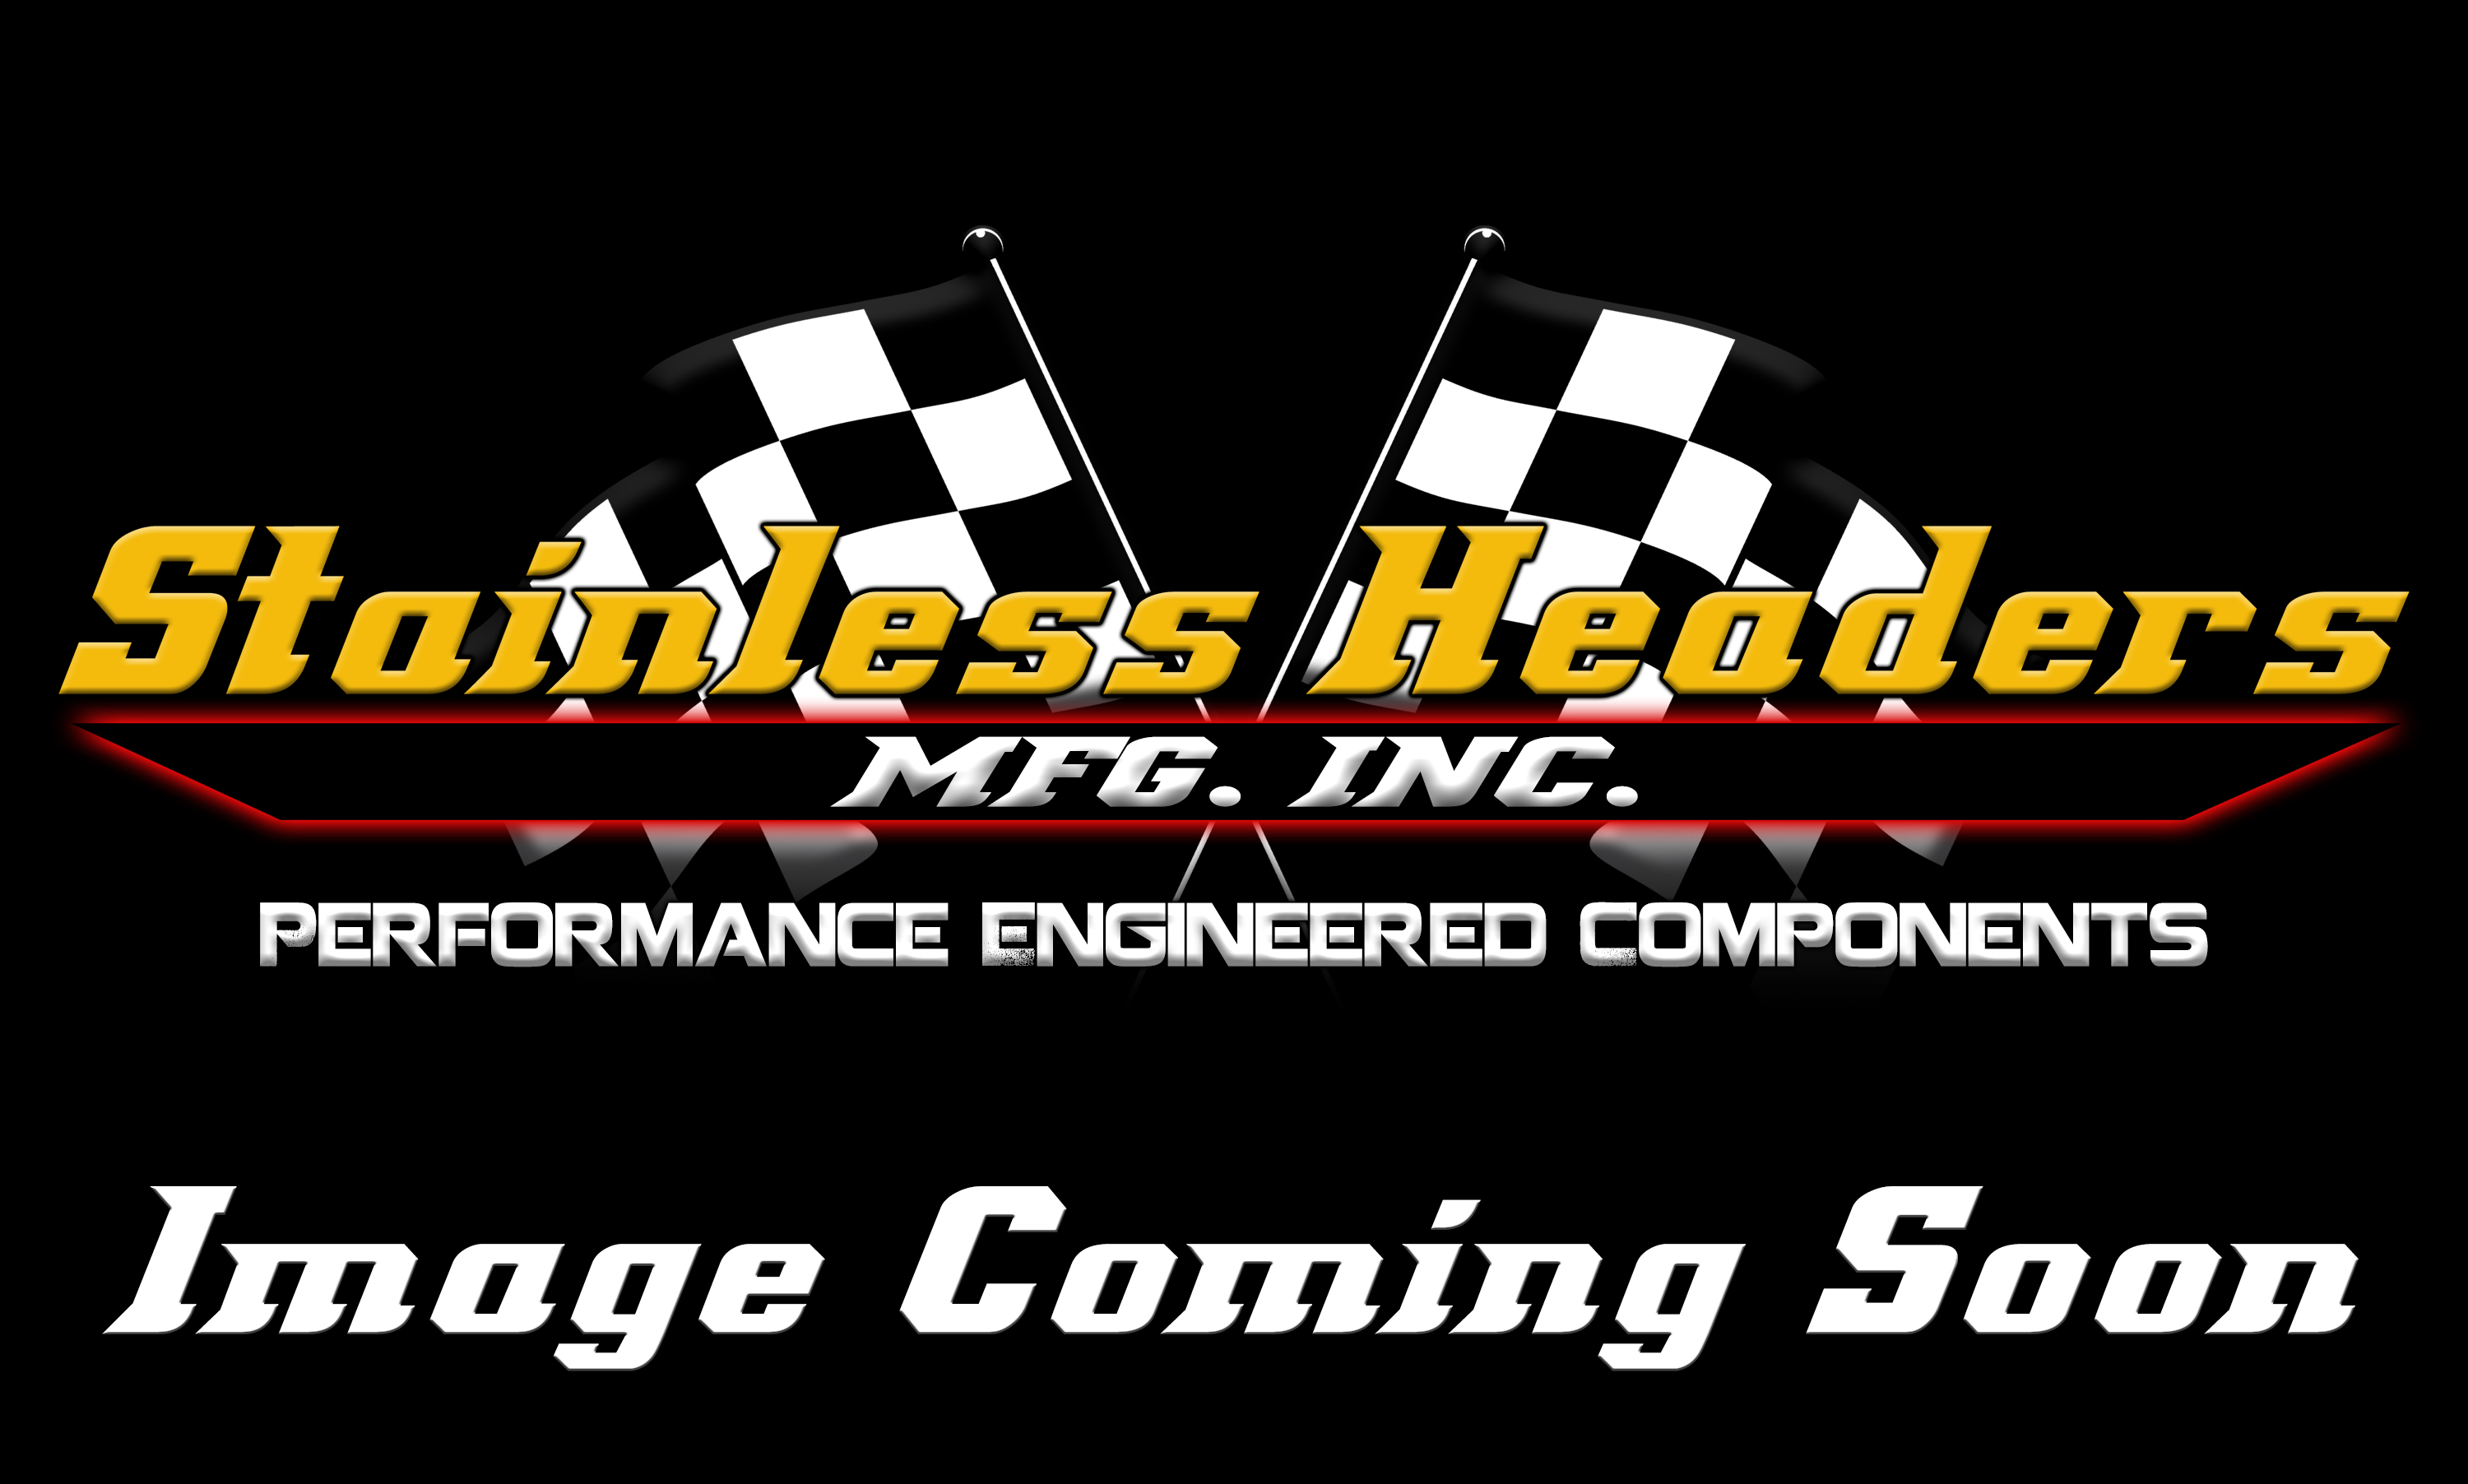 Merge Collectors - 321 Stainless Steel Merge Collectors - Stainless Headers - 2 1/2" Primary 8 into 1 Performance Merge Collector-16ga 321ss